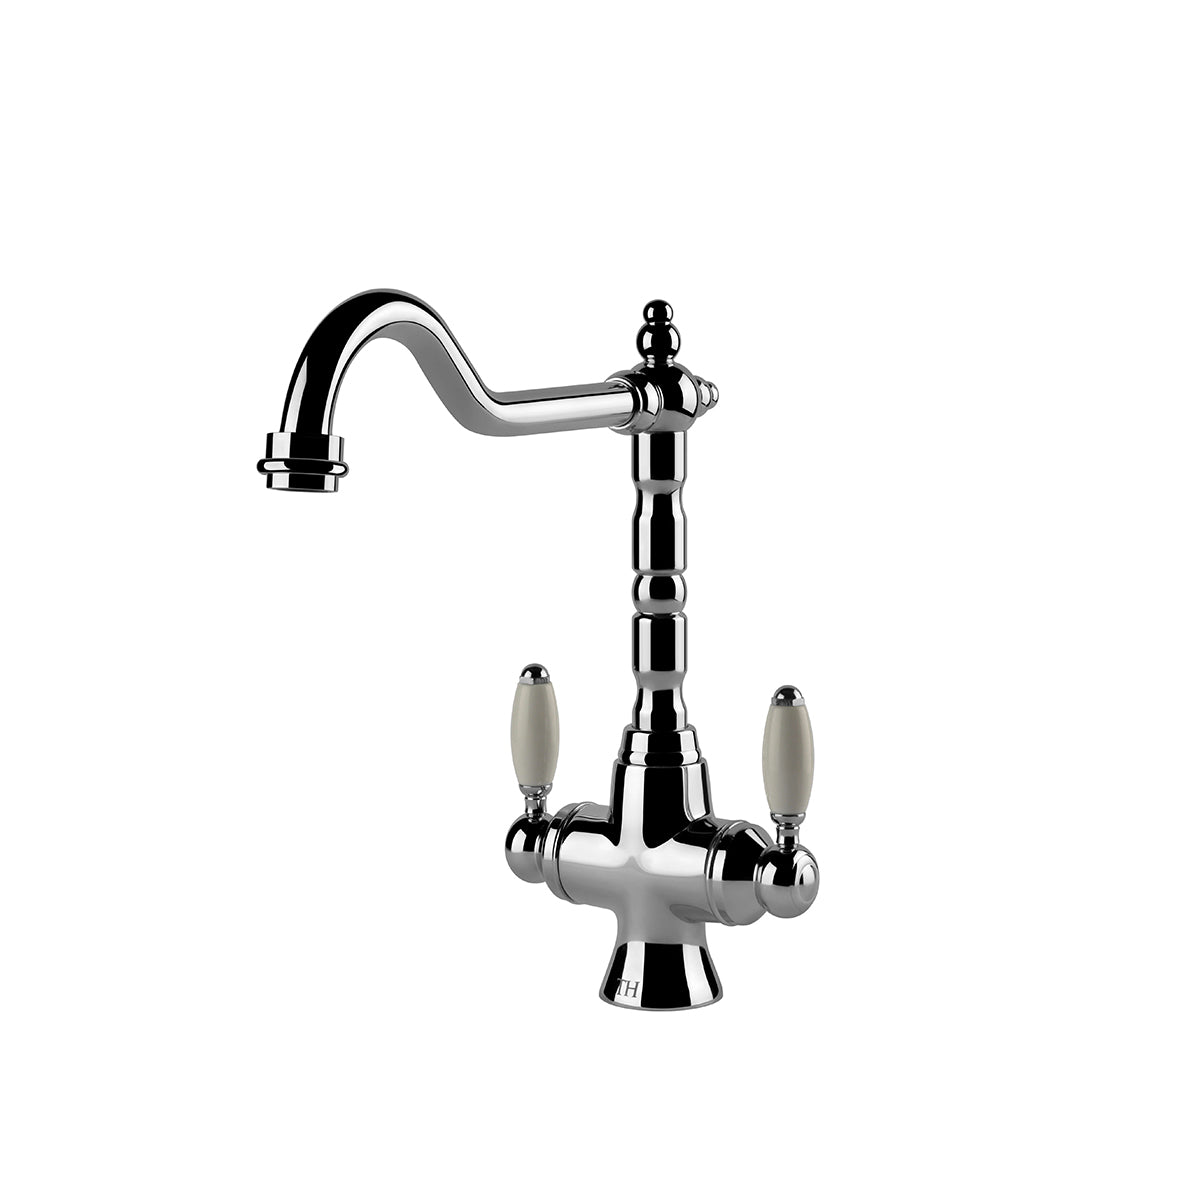 TURNER HASTINGS PROVIDENCE DOUBLE SINK MIXER 291MM CHROME (CERAMIC HANDLE)